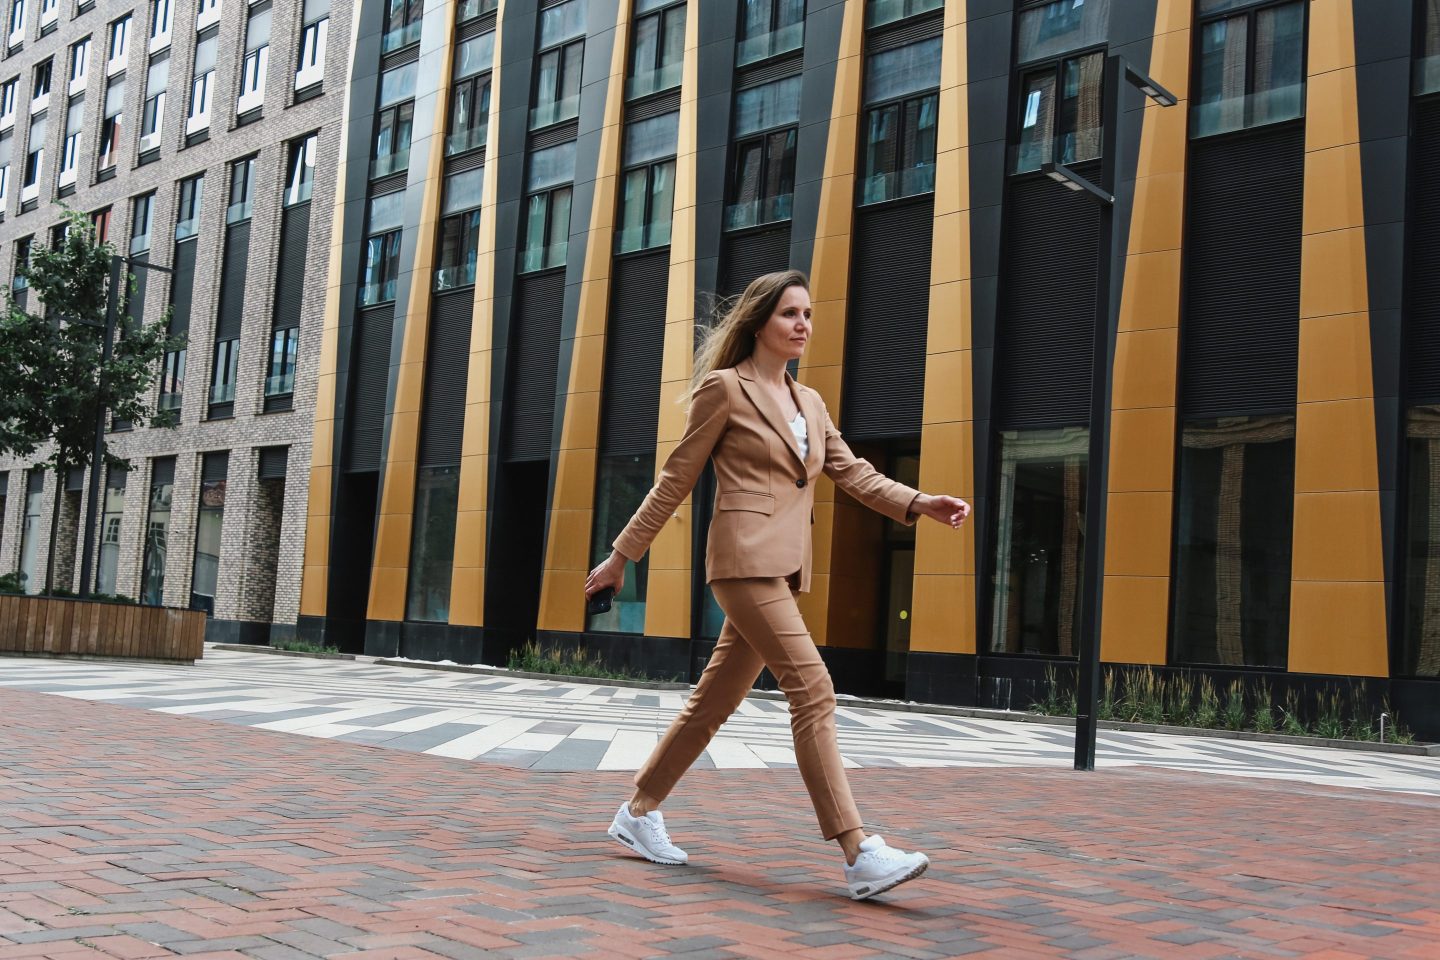 Young women walking in a business district